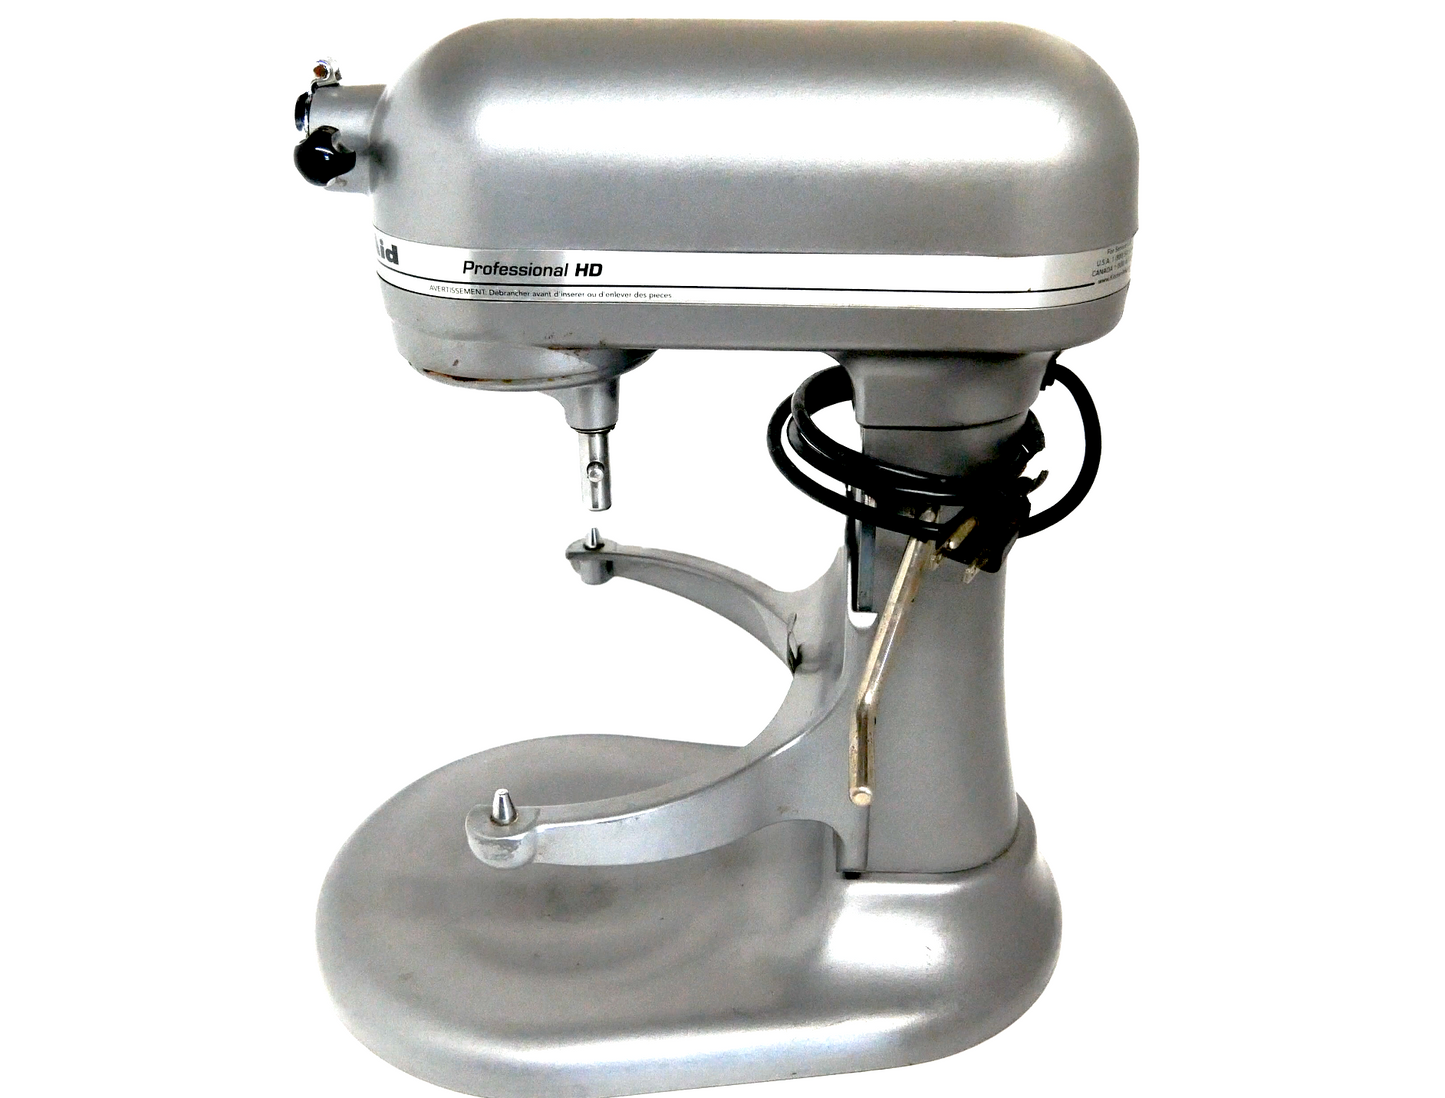 KitchenAid Professional 5 Plus Series 5 Quart Bowl-Lift Stand Mixer (USED, Body Only)